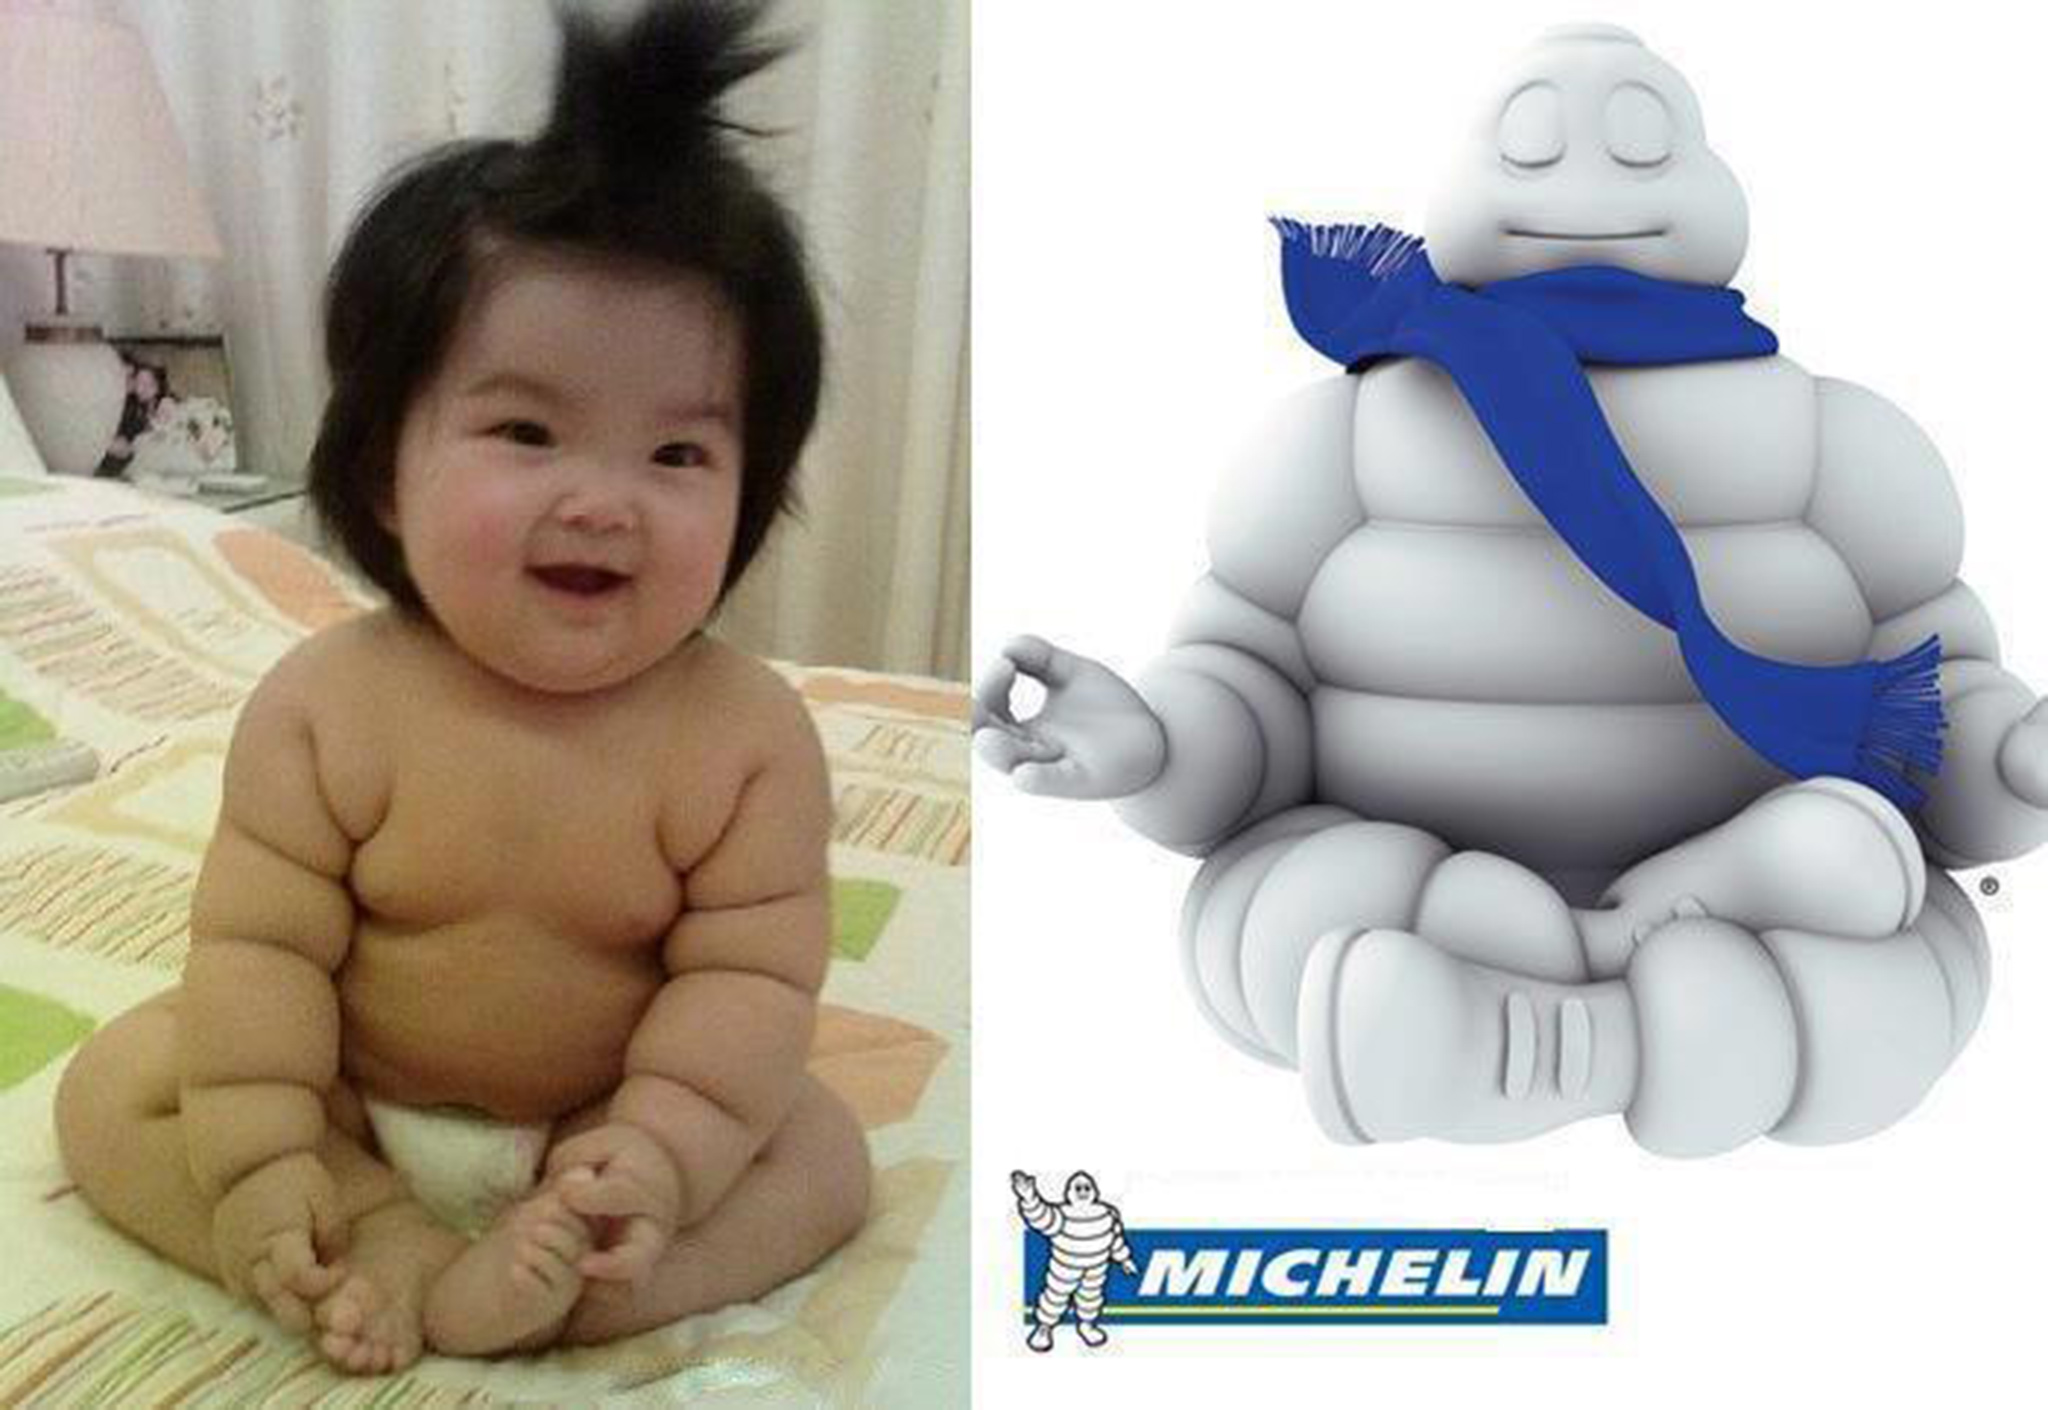 10 This Baby & The Michelin Man